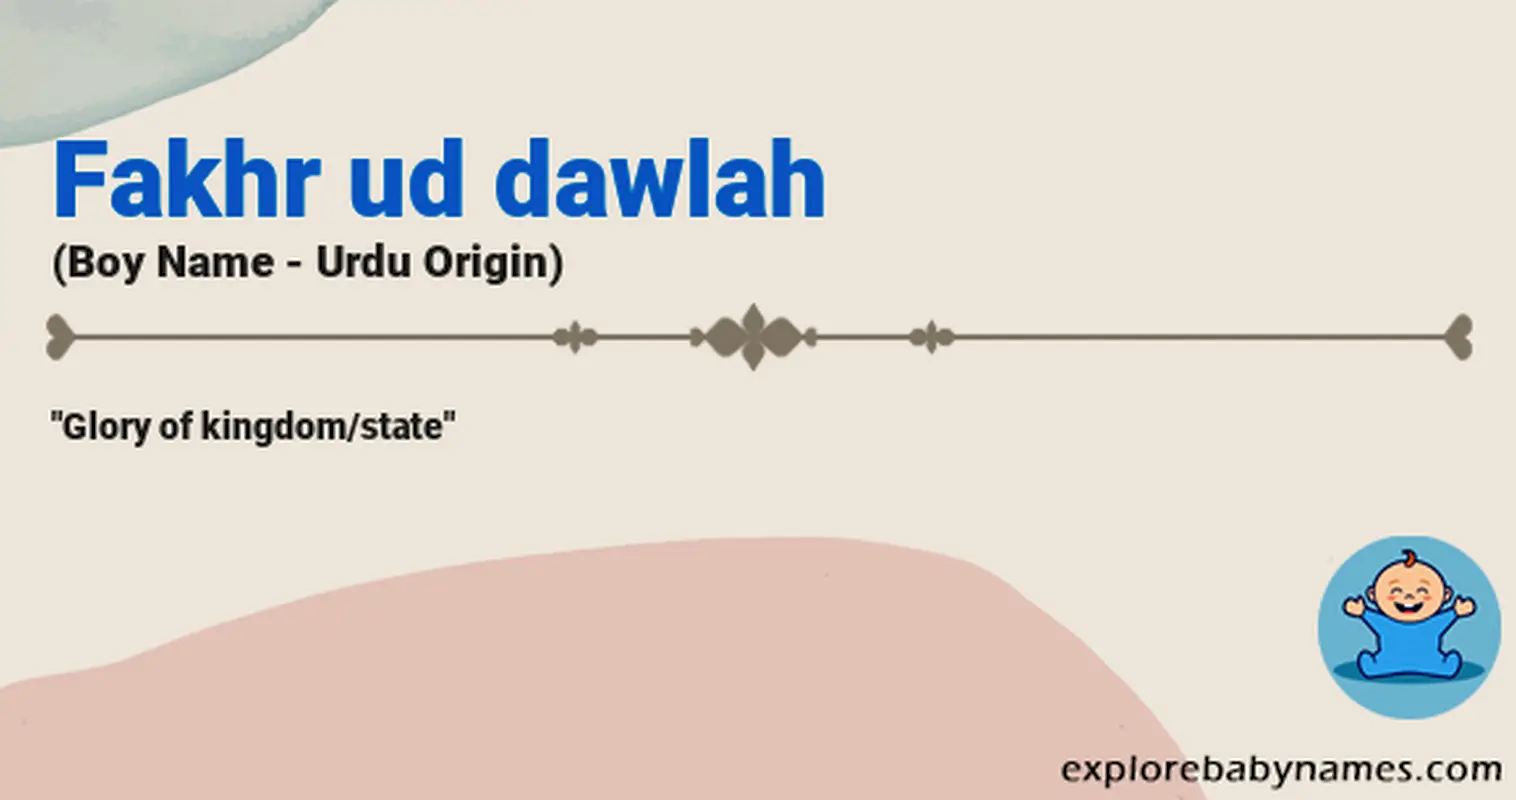 Meaning of Fakhr ud dawlah